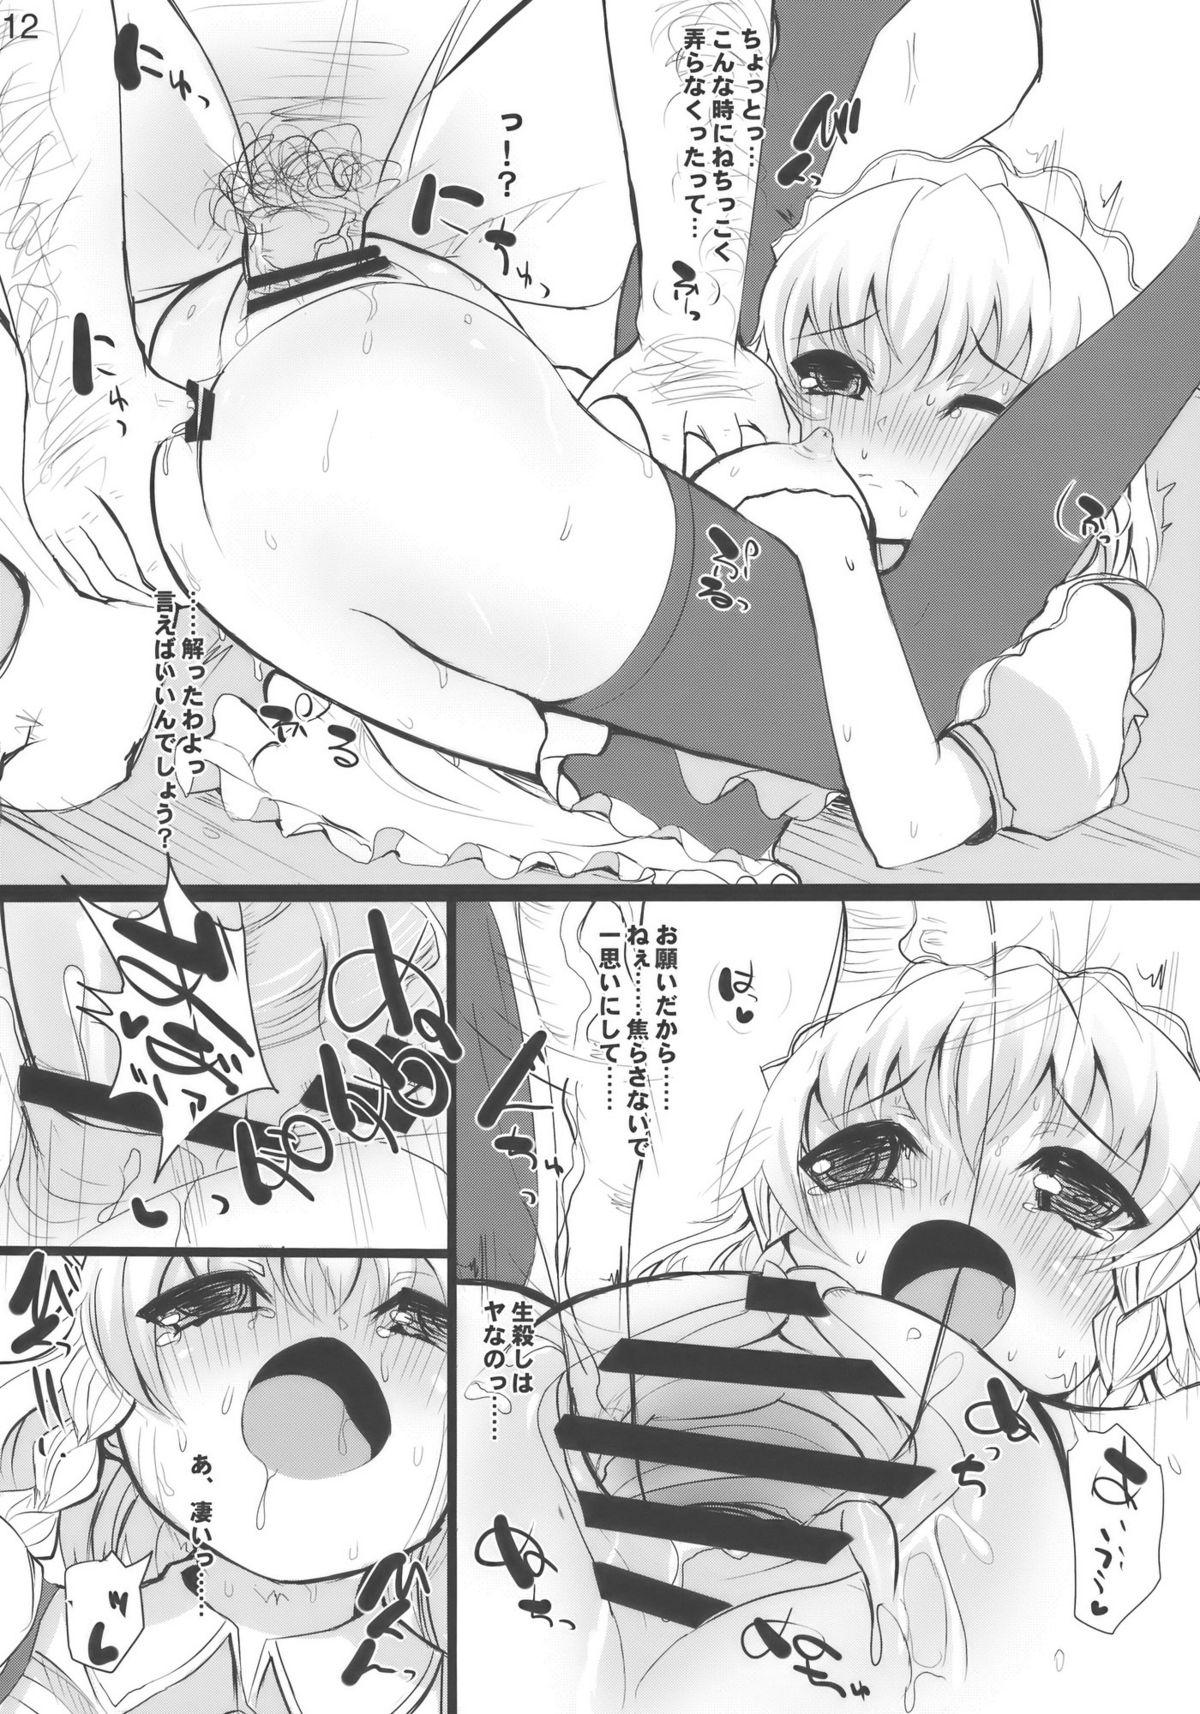 Female Domination Feed me with your Kiss - Touhou project Upskirt - Page 12